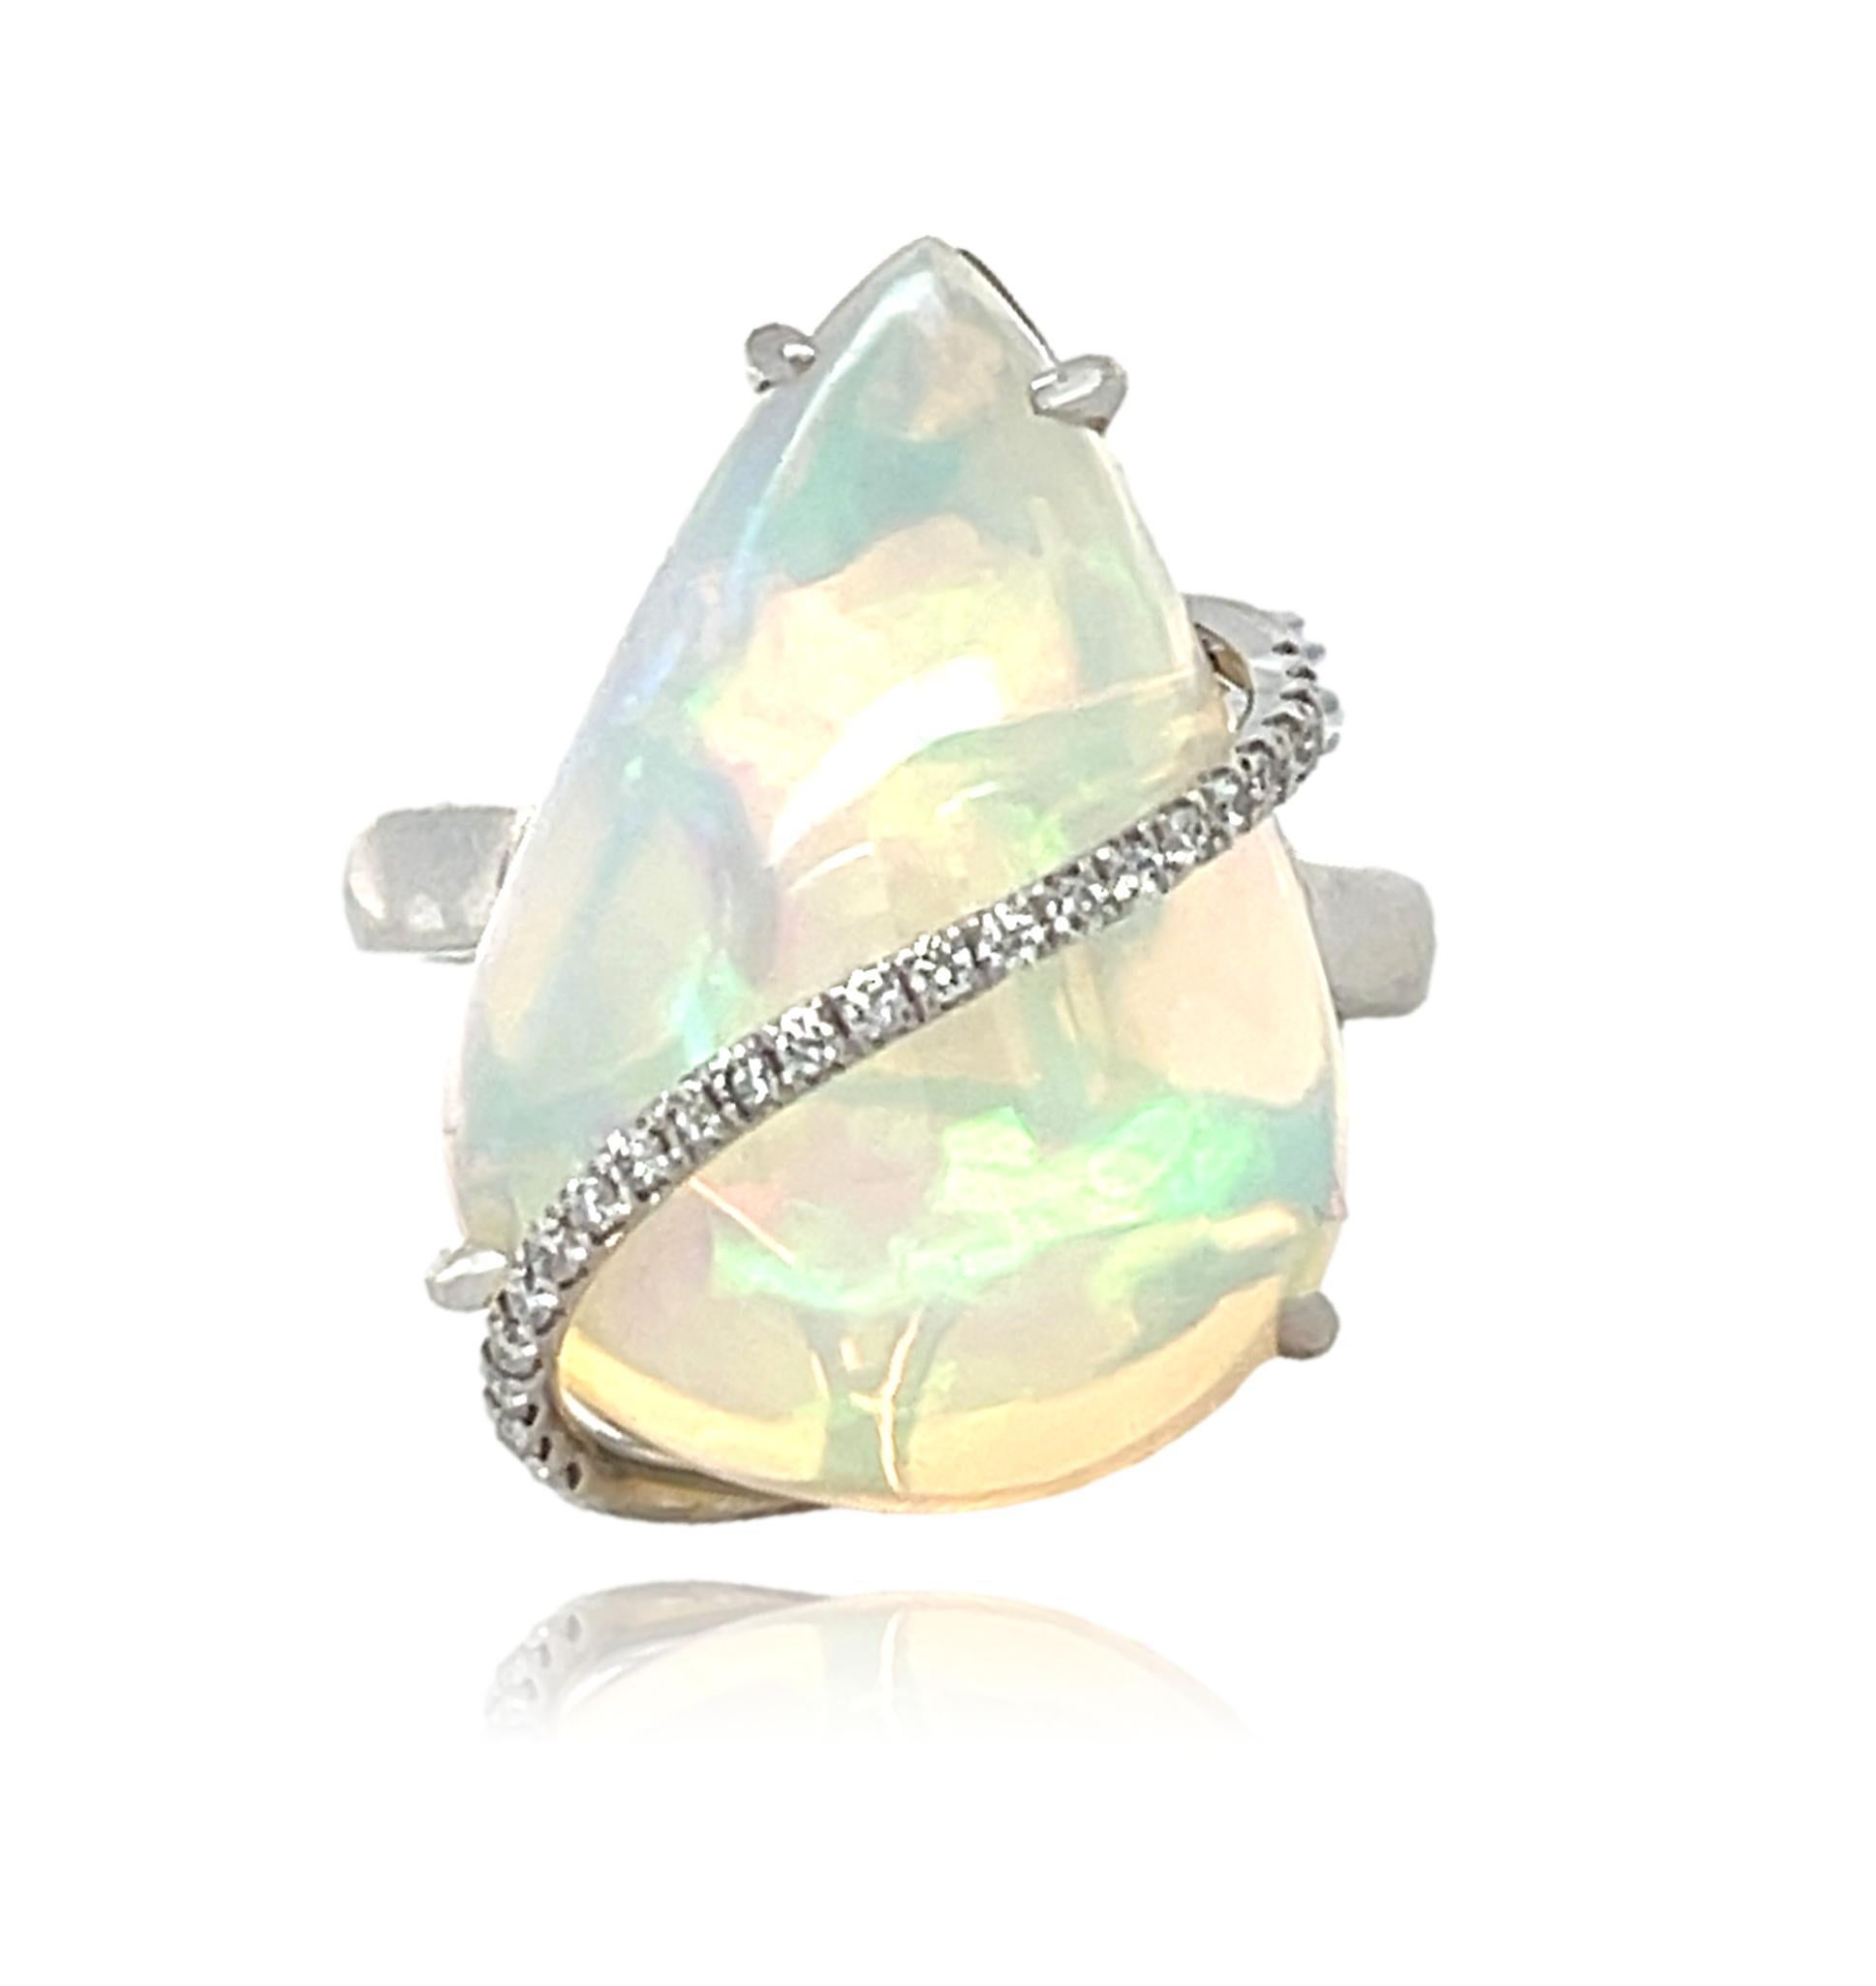 13 ct Ethiopian Opal and Diamond Ring in 14KW Gold  For Sale 1